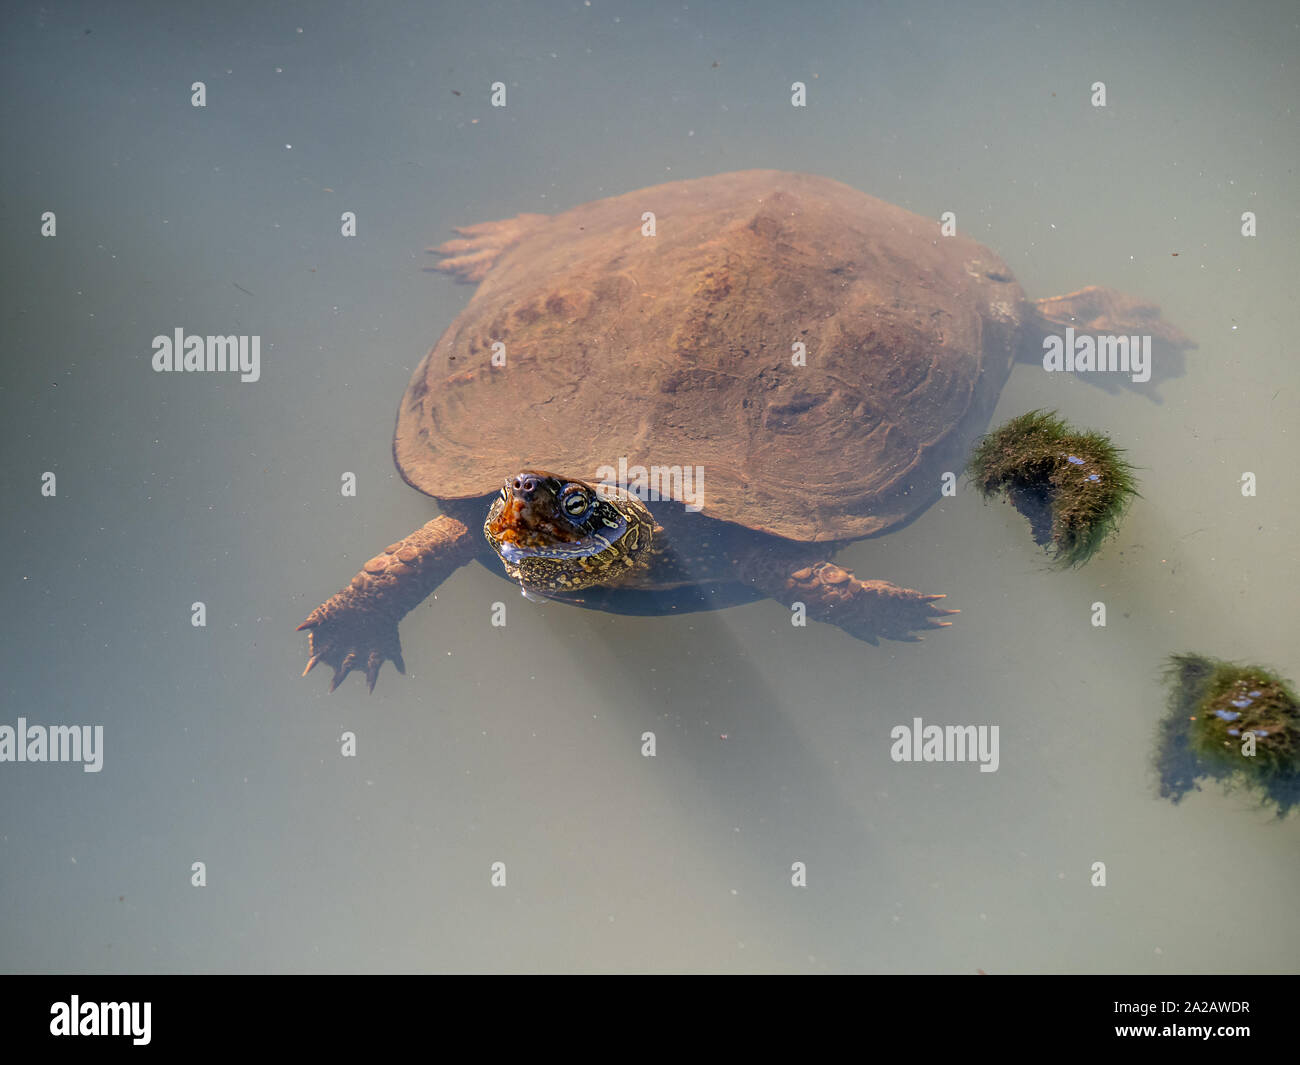 A chinese pond turtle, Mauremys reevesii, swims in a small pond in a Japanese park. Considered endangered in the wild, they are still commonly bred as Stock Photo